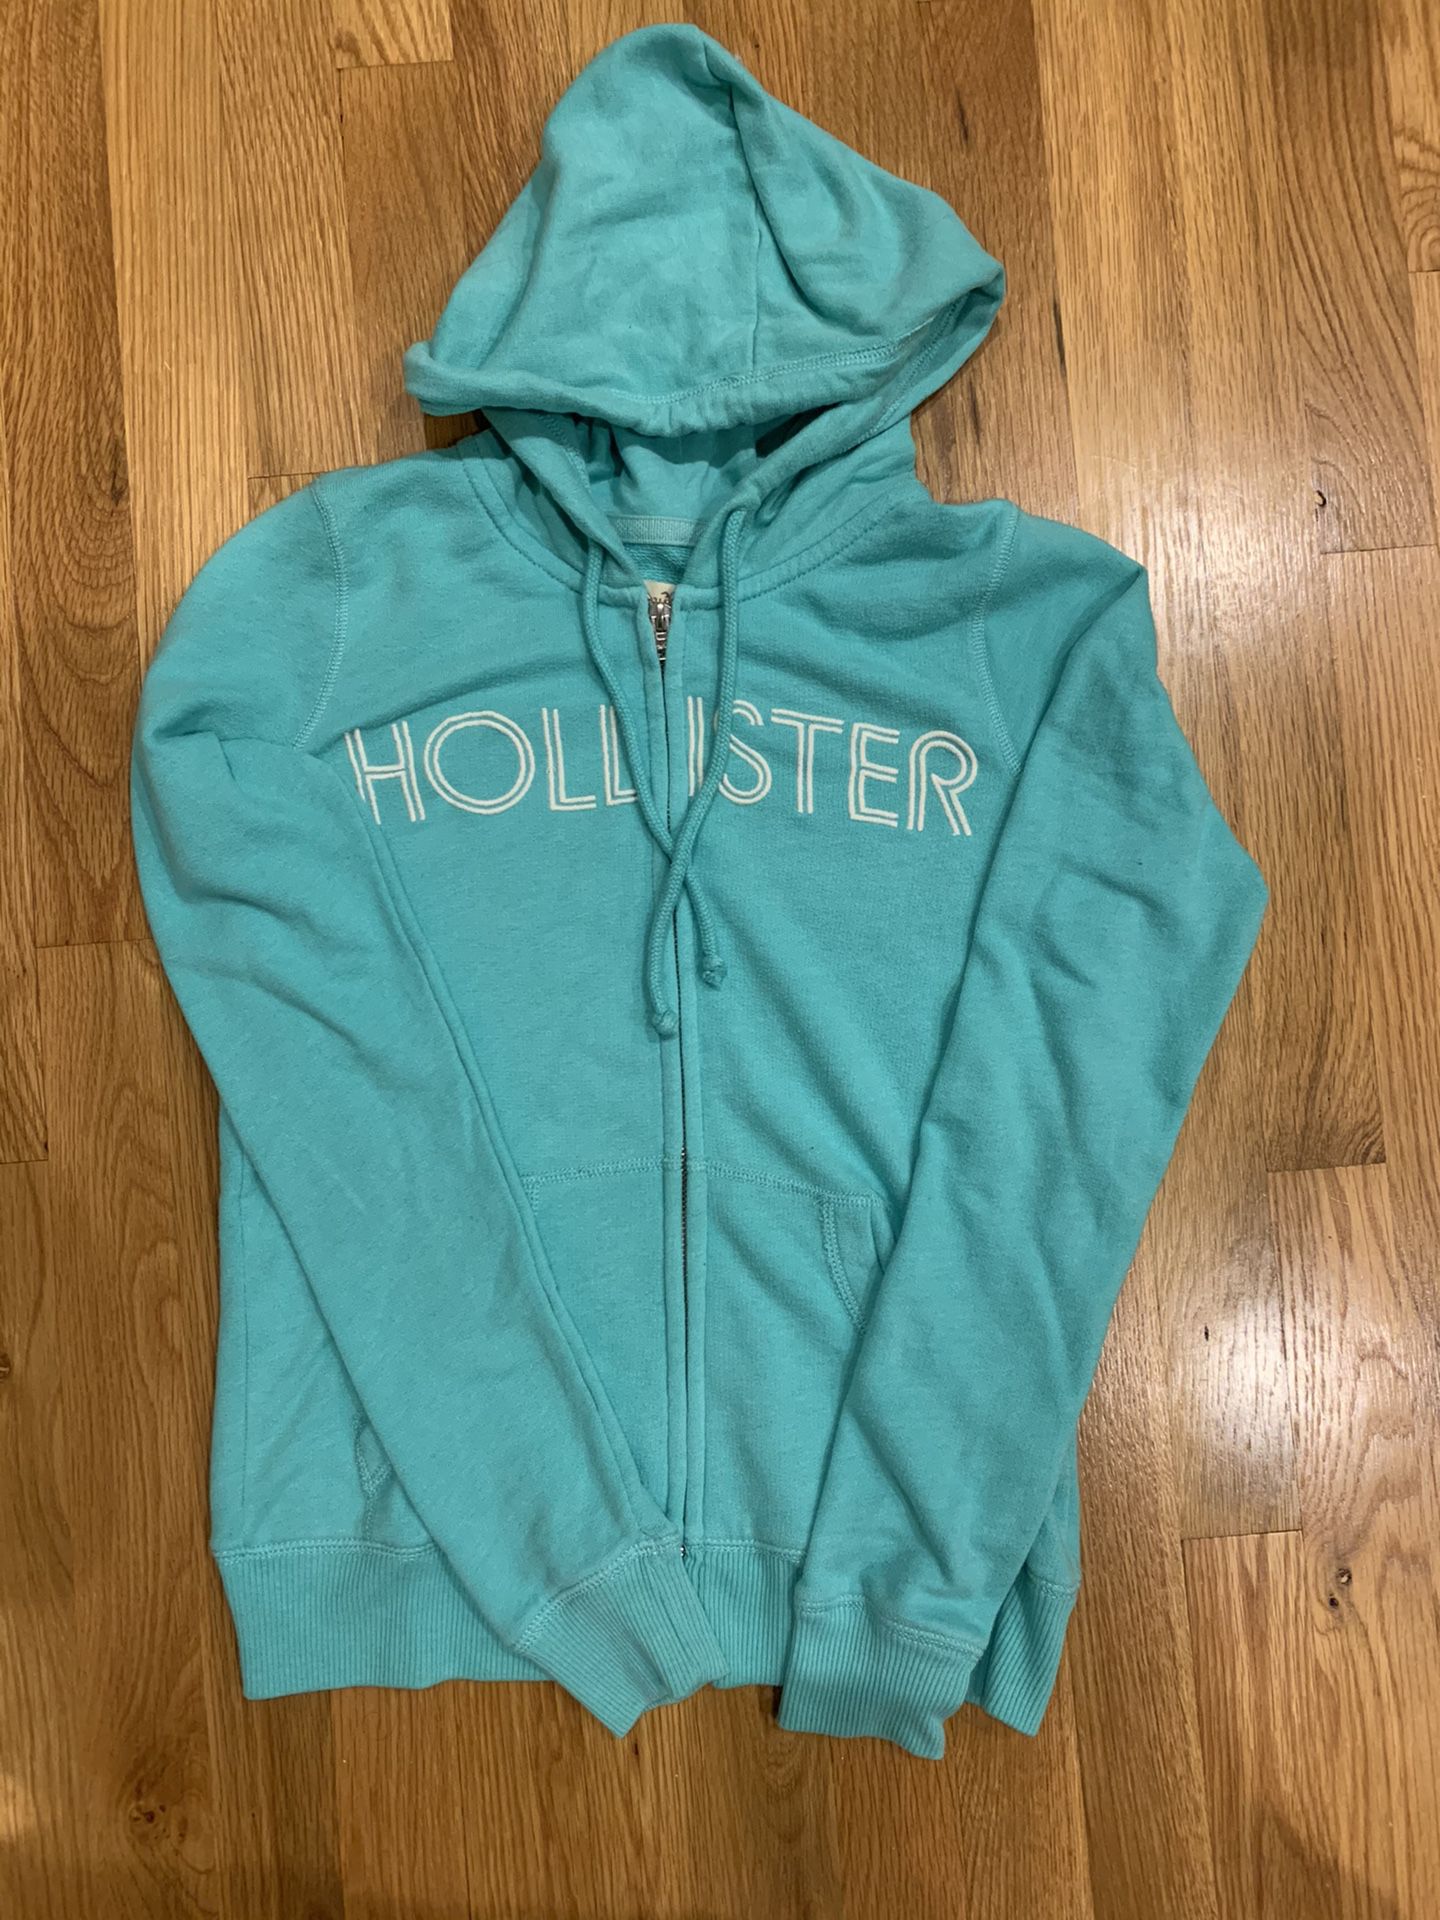 Hollister Size Small Hoodie